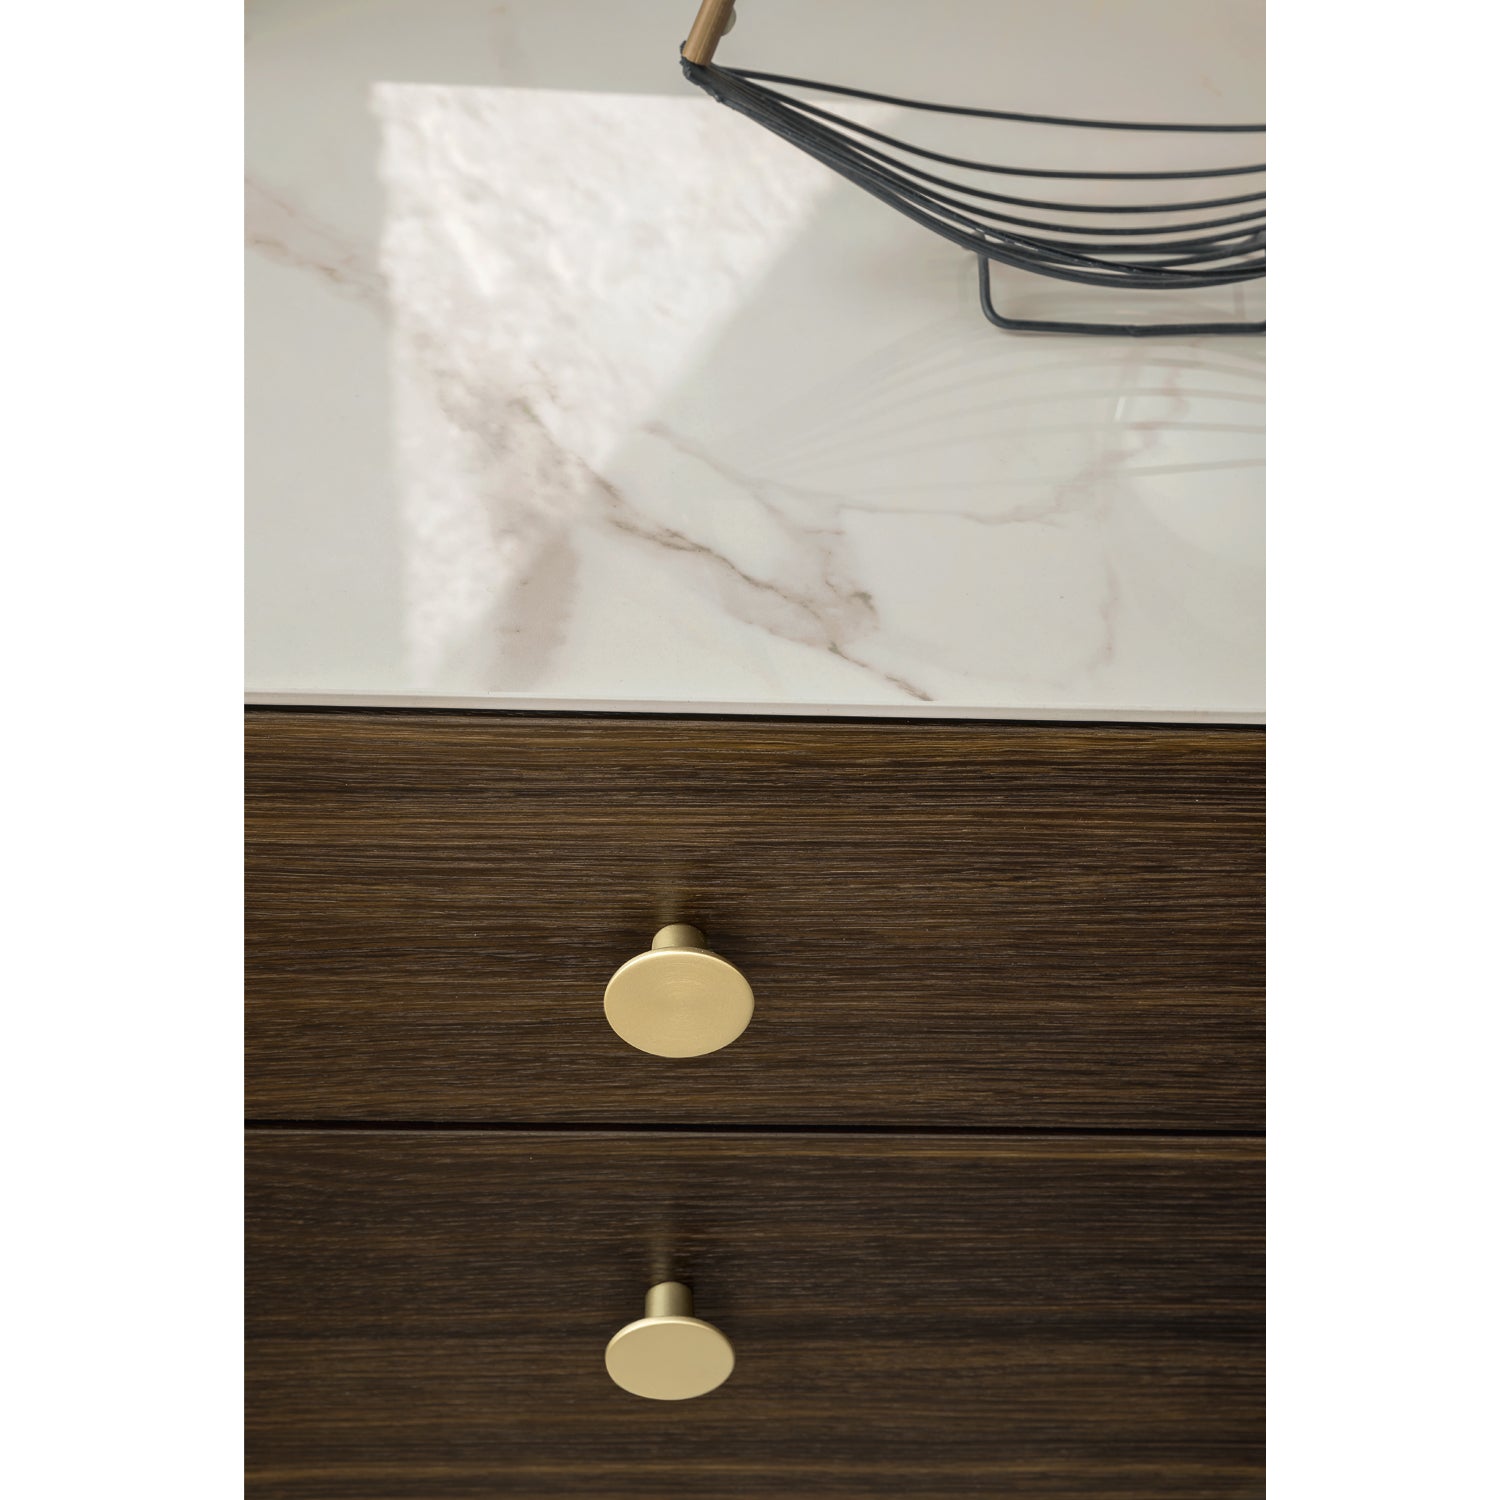 Settanta bedside table by Dall'Agnese